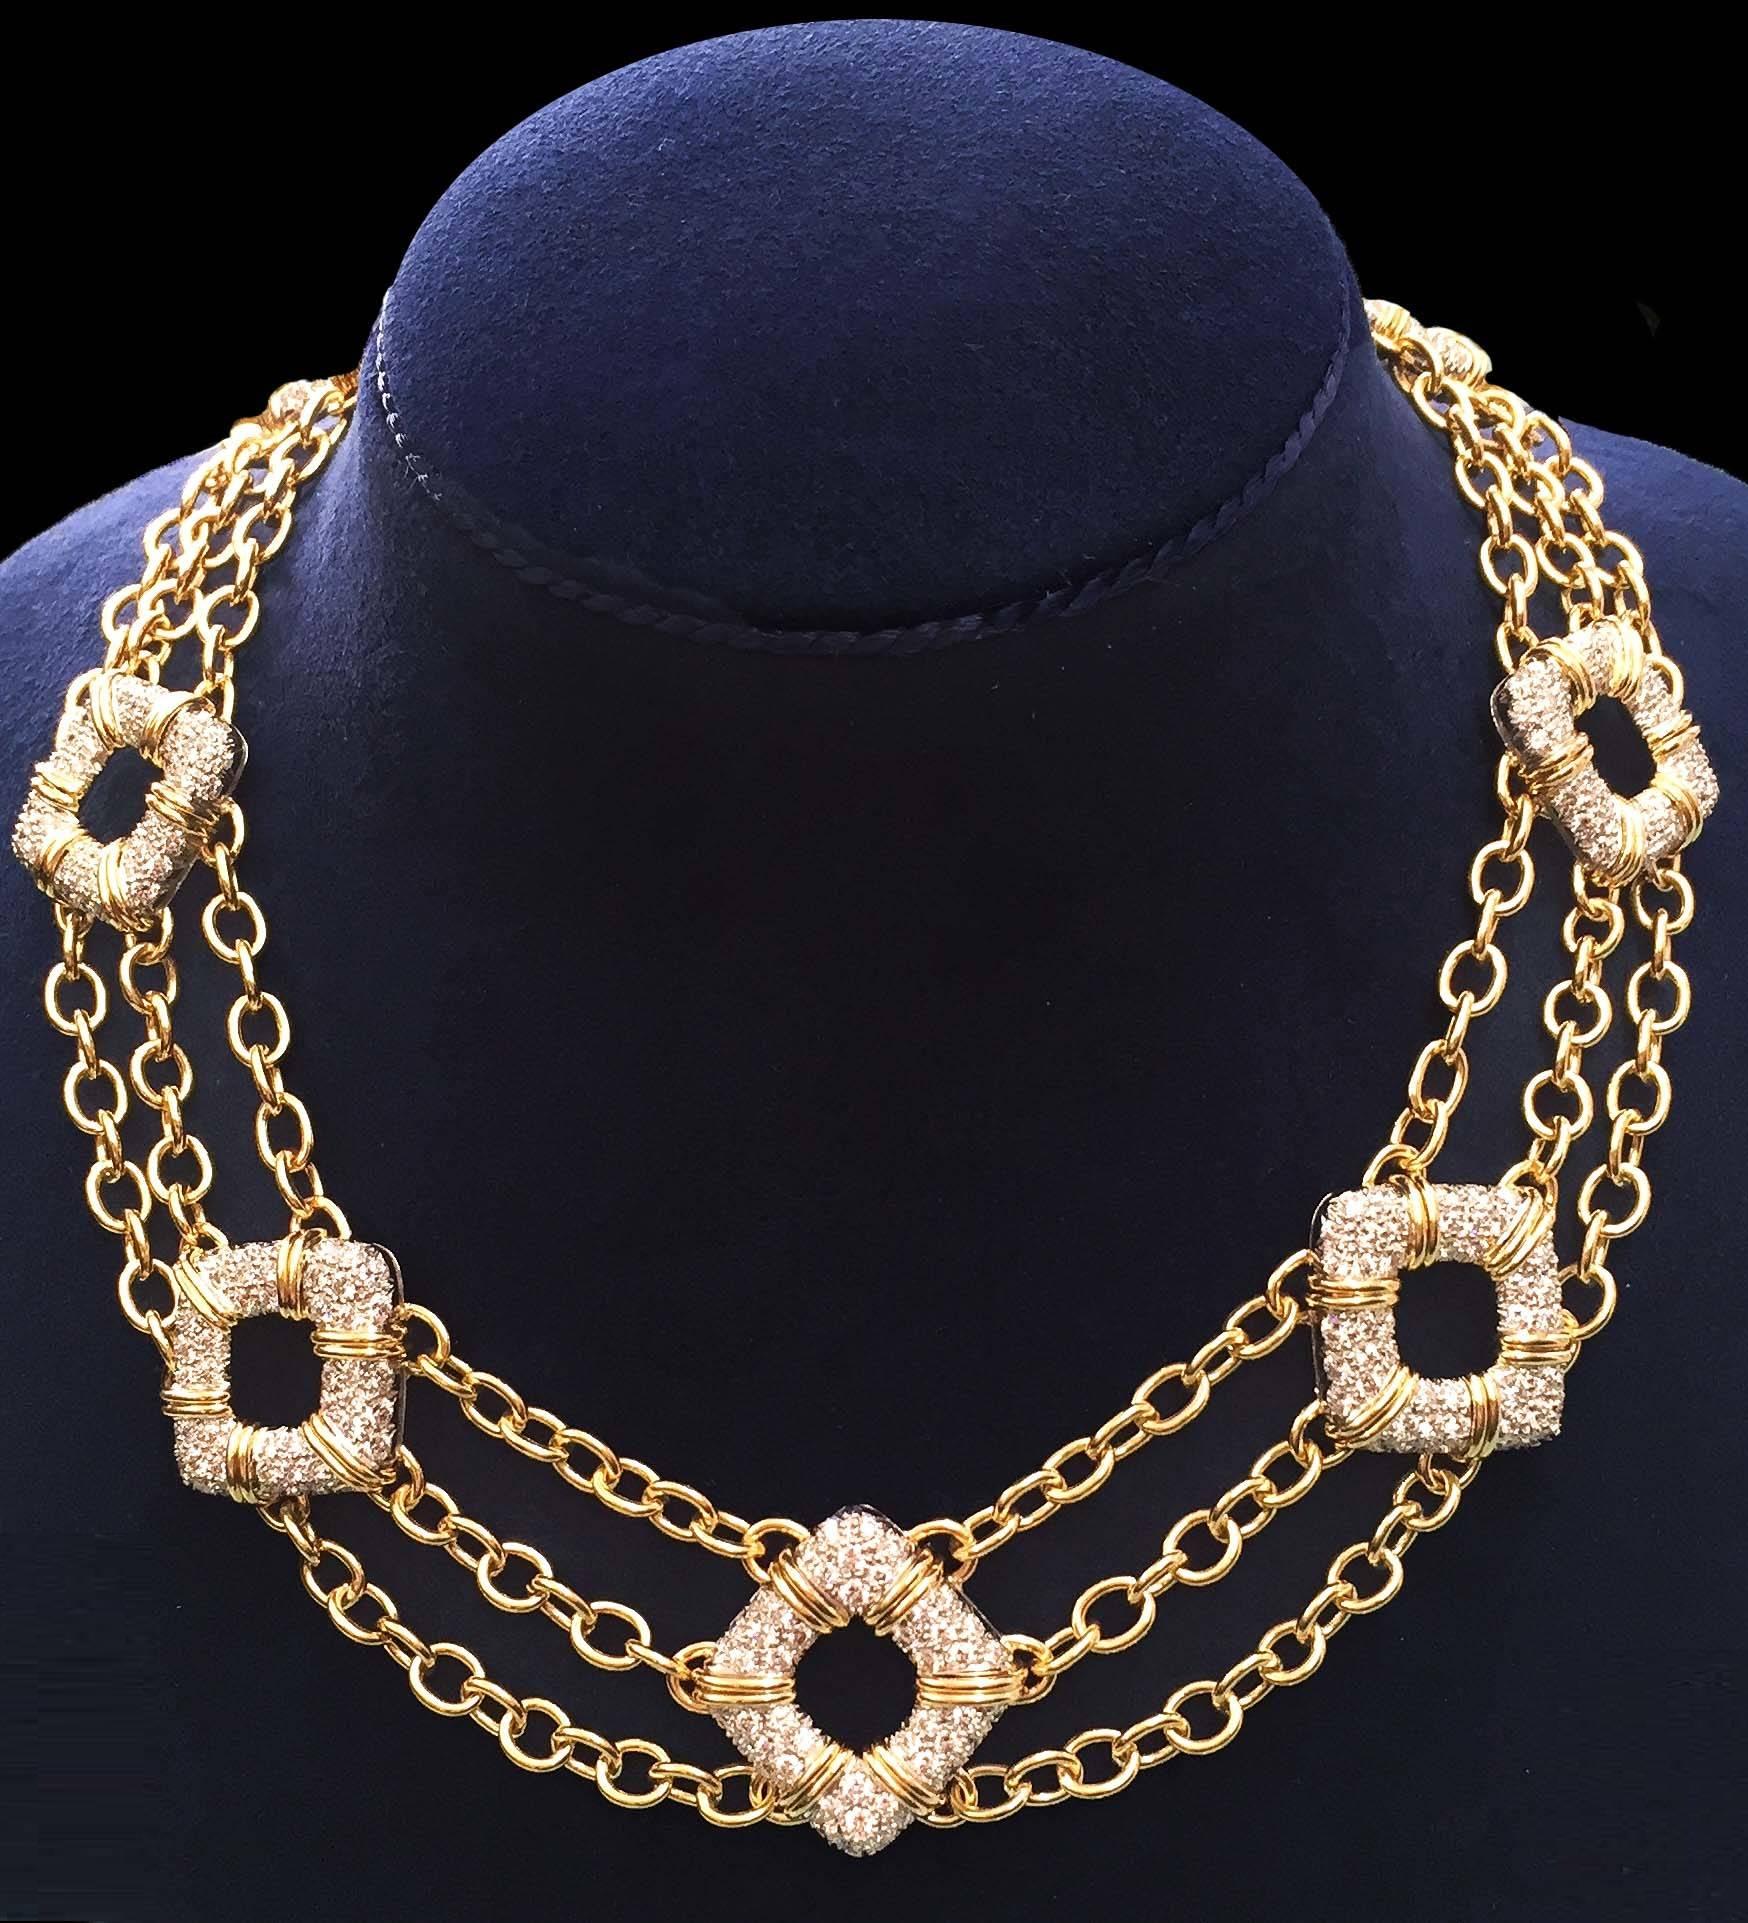 For decades, Valentin Magro's fine jewelry creations have illuminated the most special of occasions. This magnificent necklace features 7 Nautical motif sections with round brilliant diamonds linked with triple gold chains of oval links and is